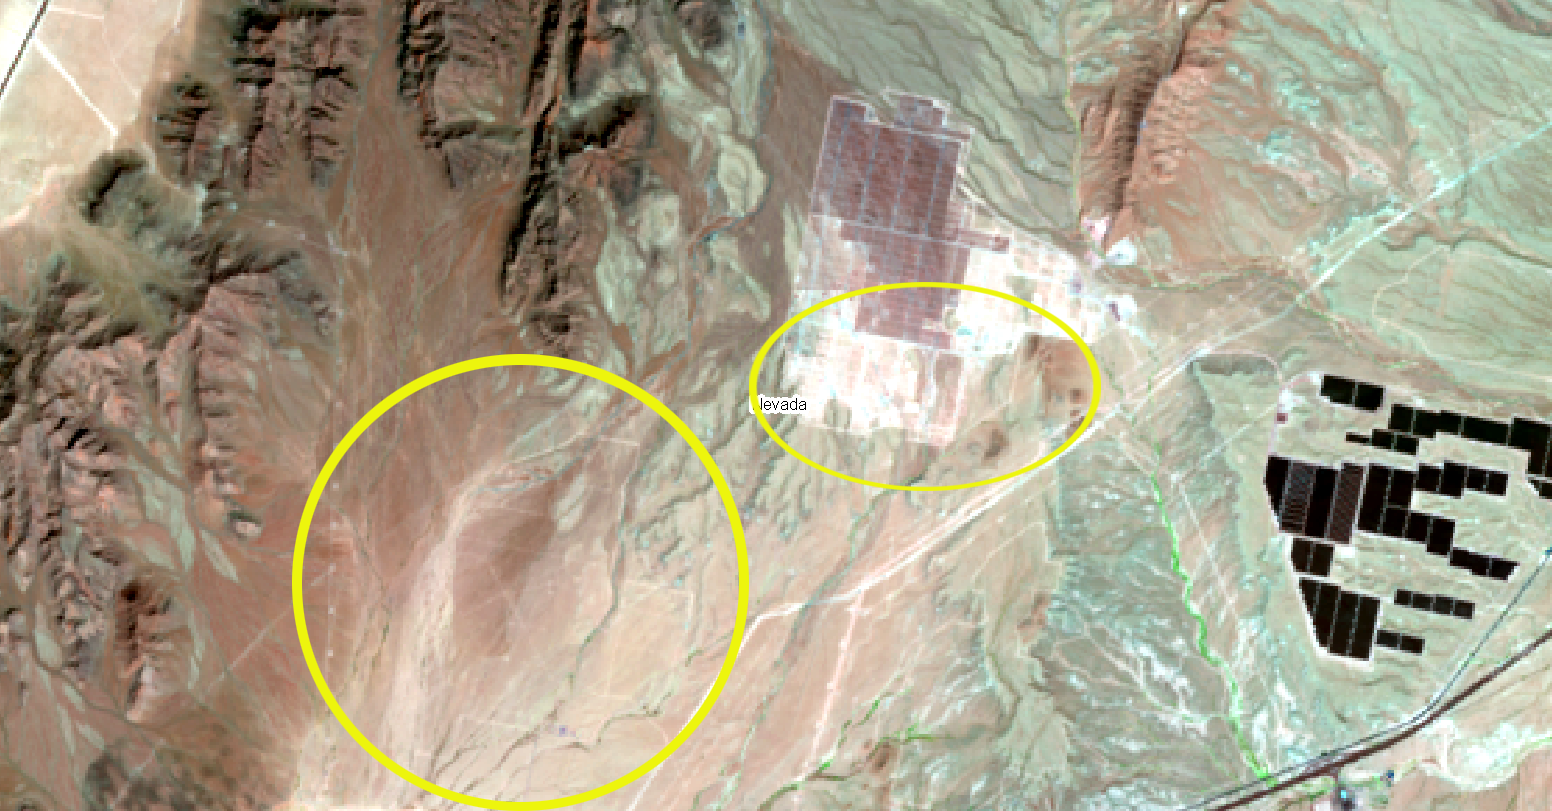 image showing 2021 clearing of land for solar panels